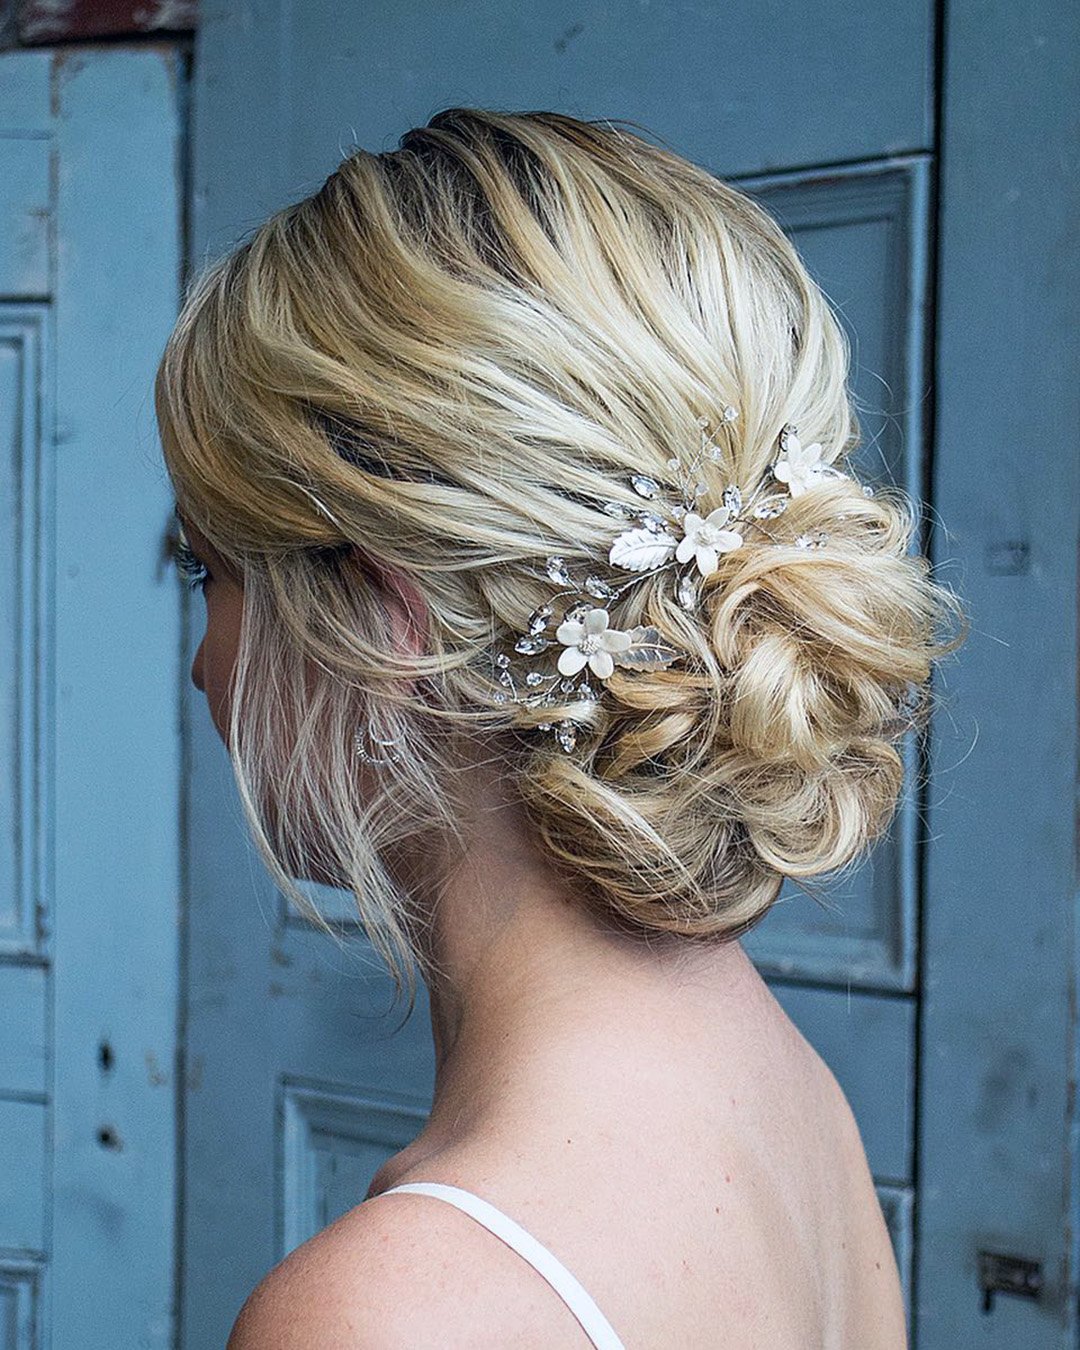 22+ Mother of the bride hairstyles 2021 ideas